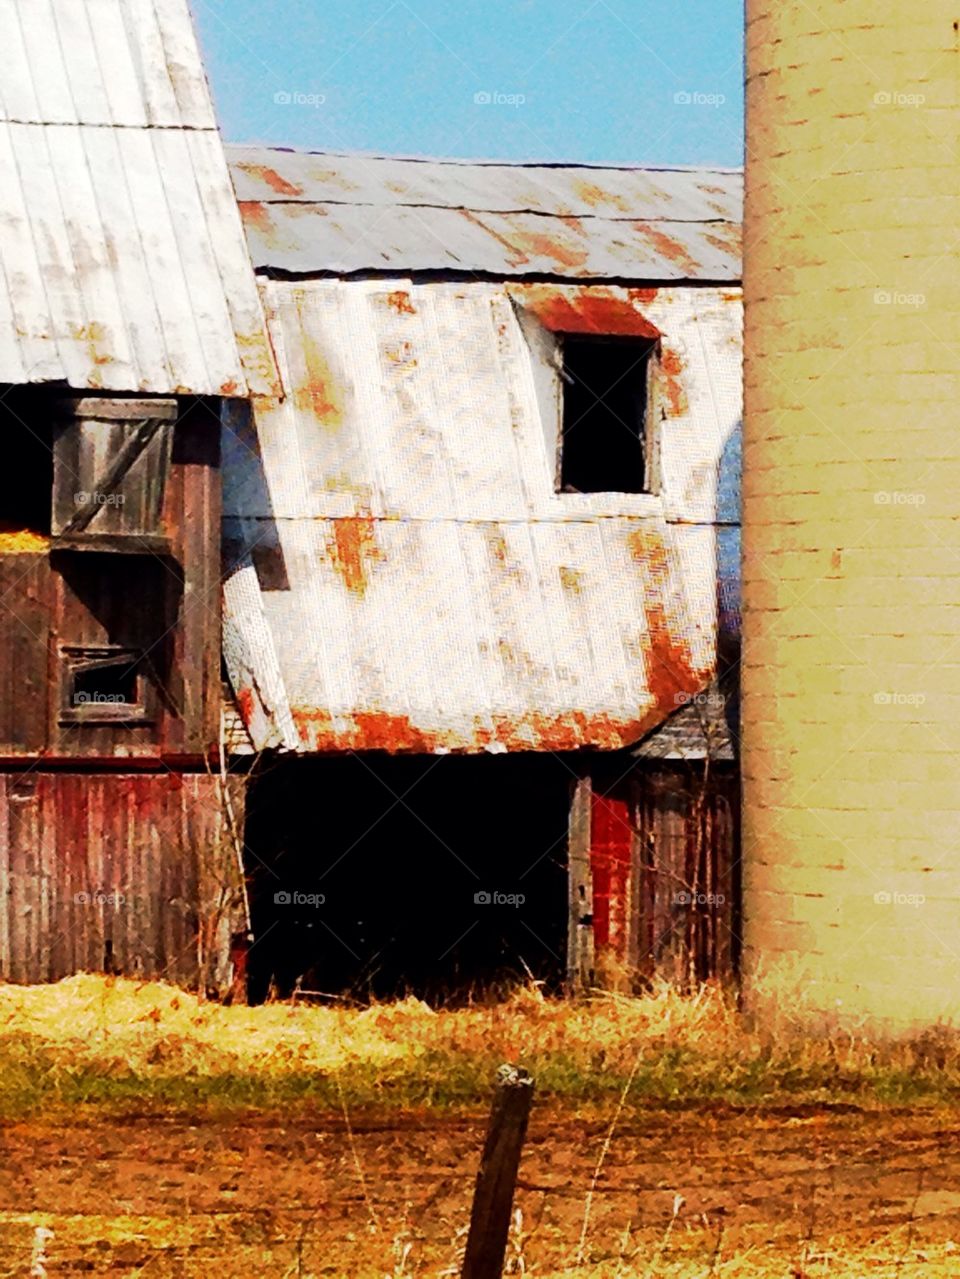 This Old Barn 